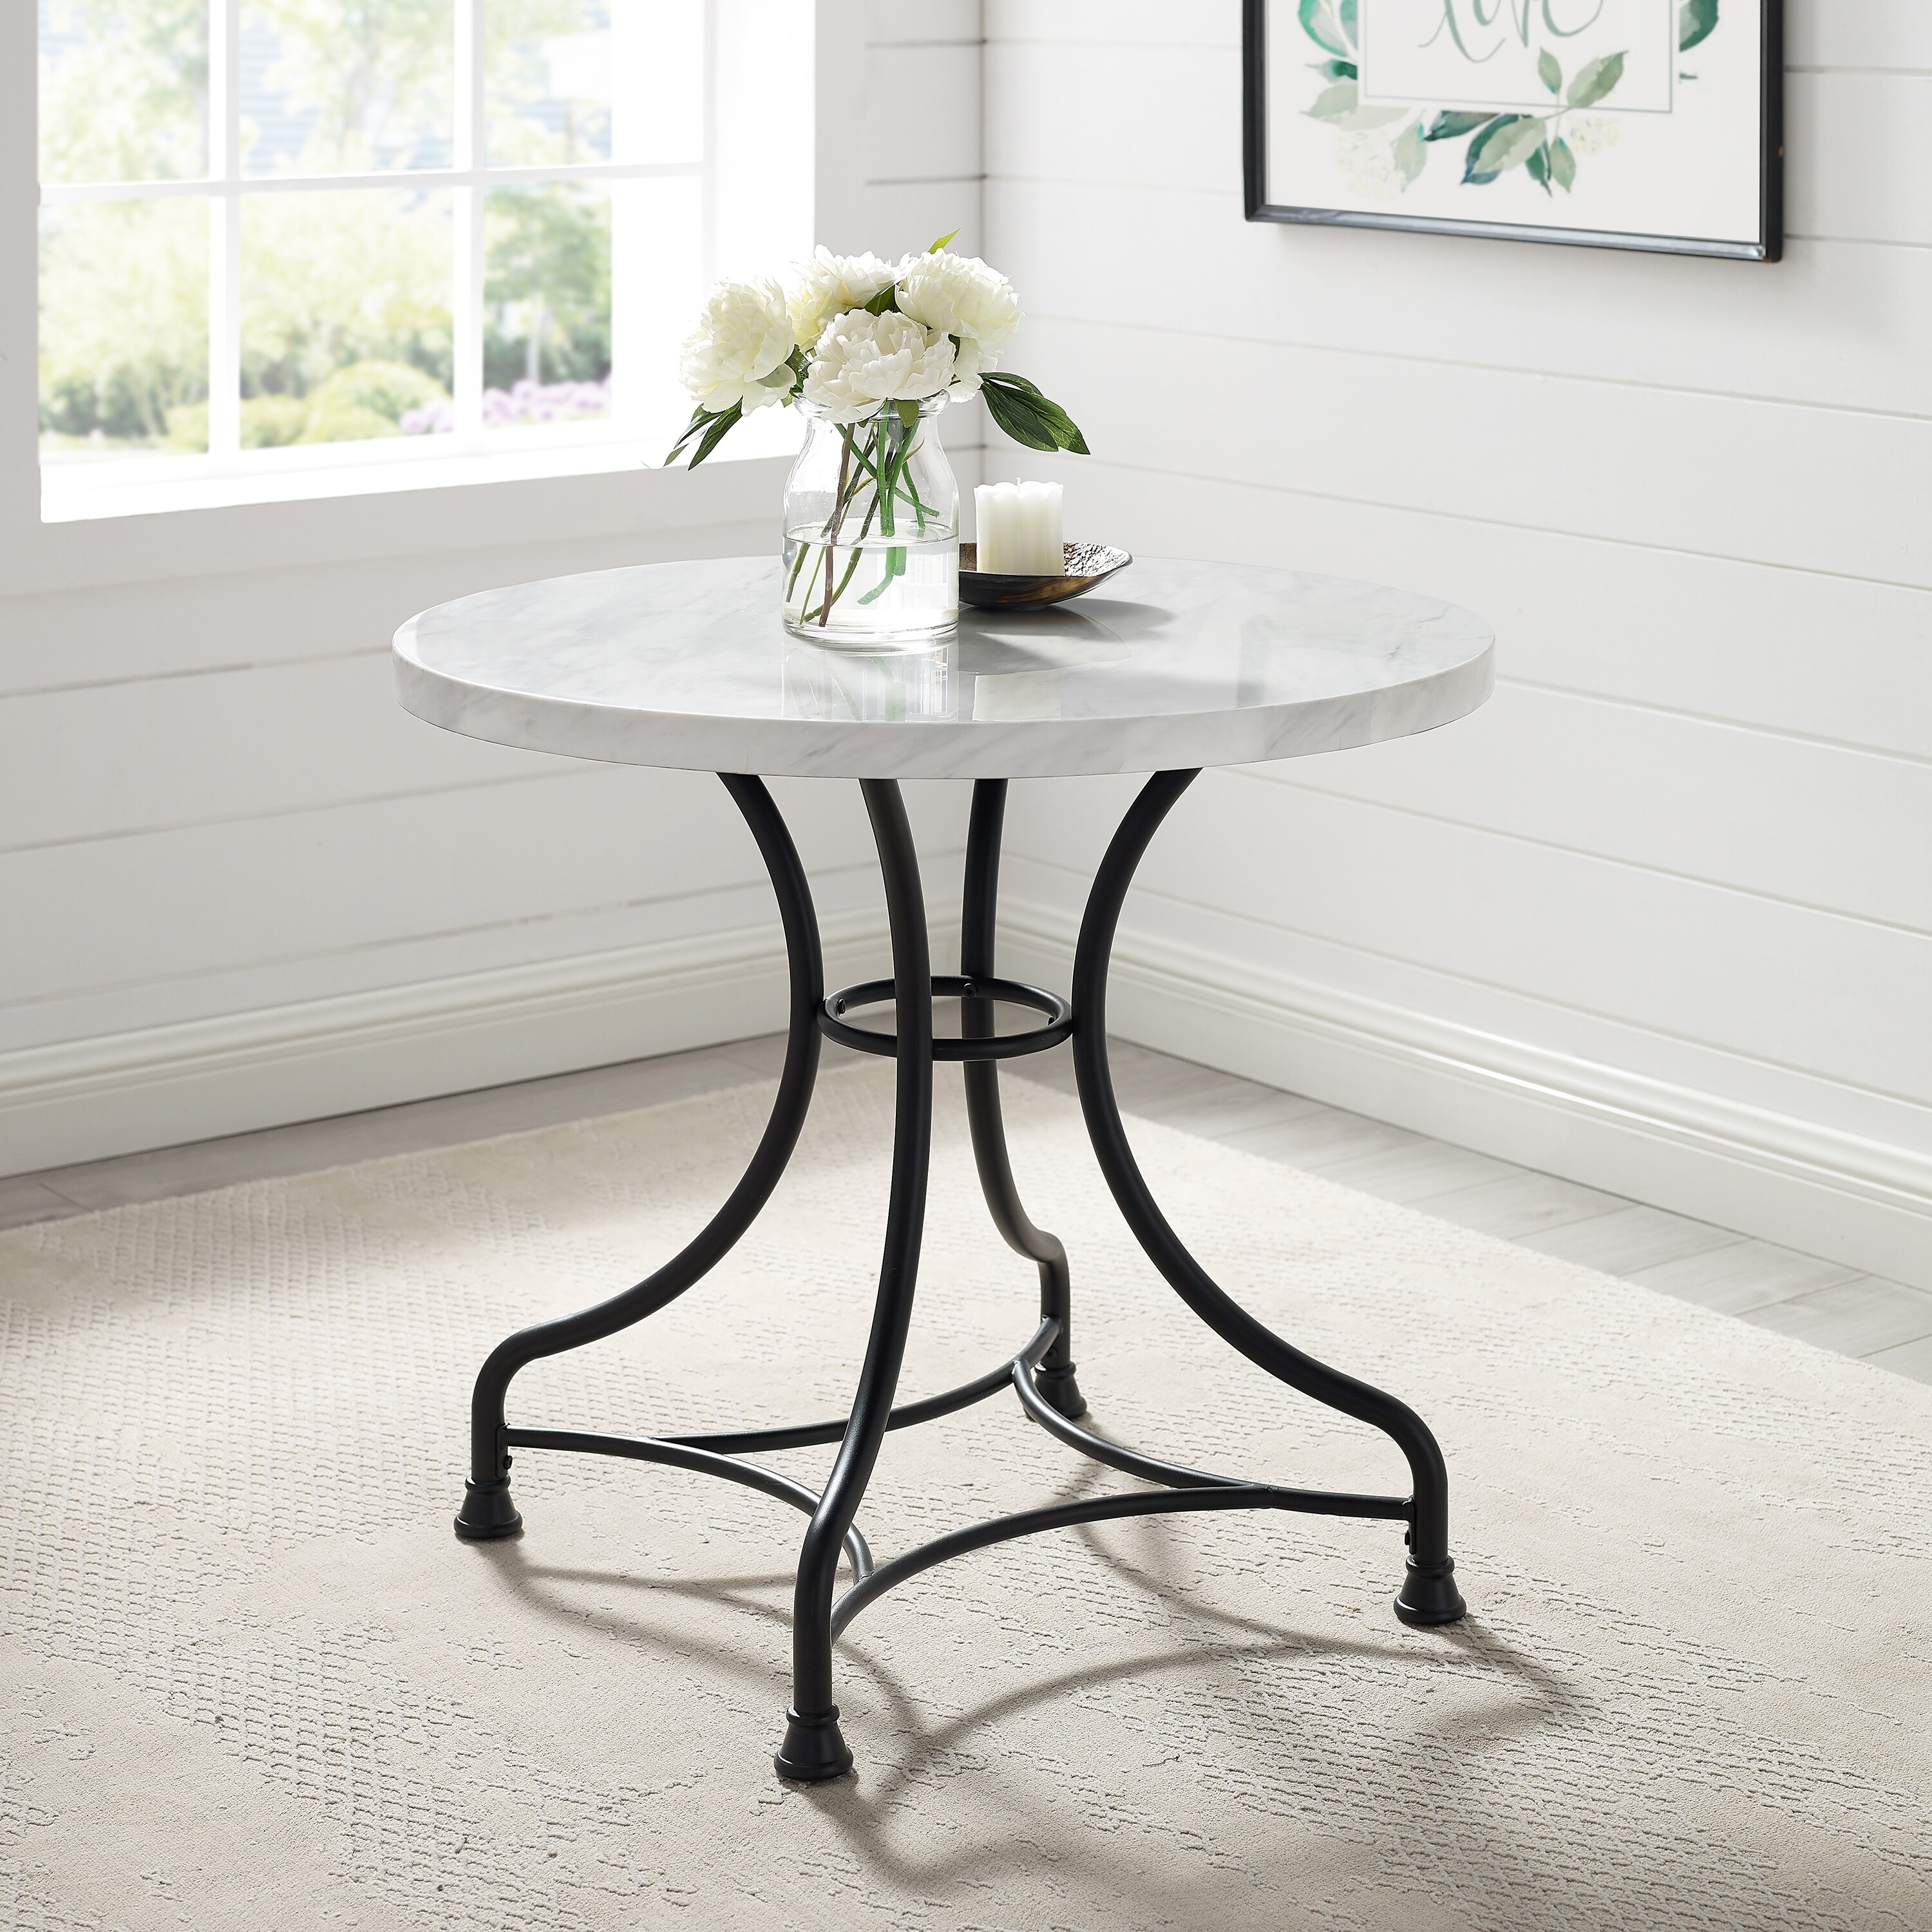 Carbon Loft Davidson 32 Inch Round Dining Table Black On Sale Overstock 28572458